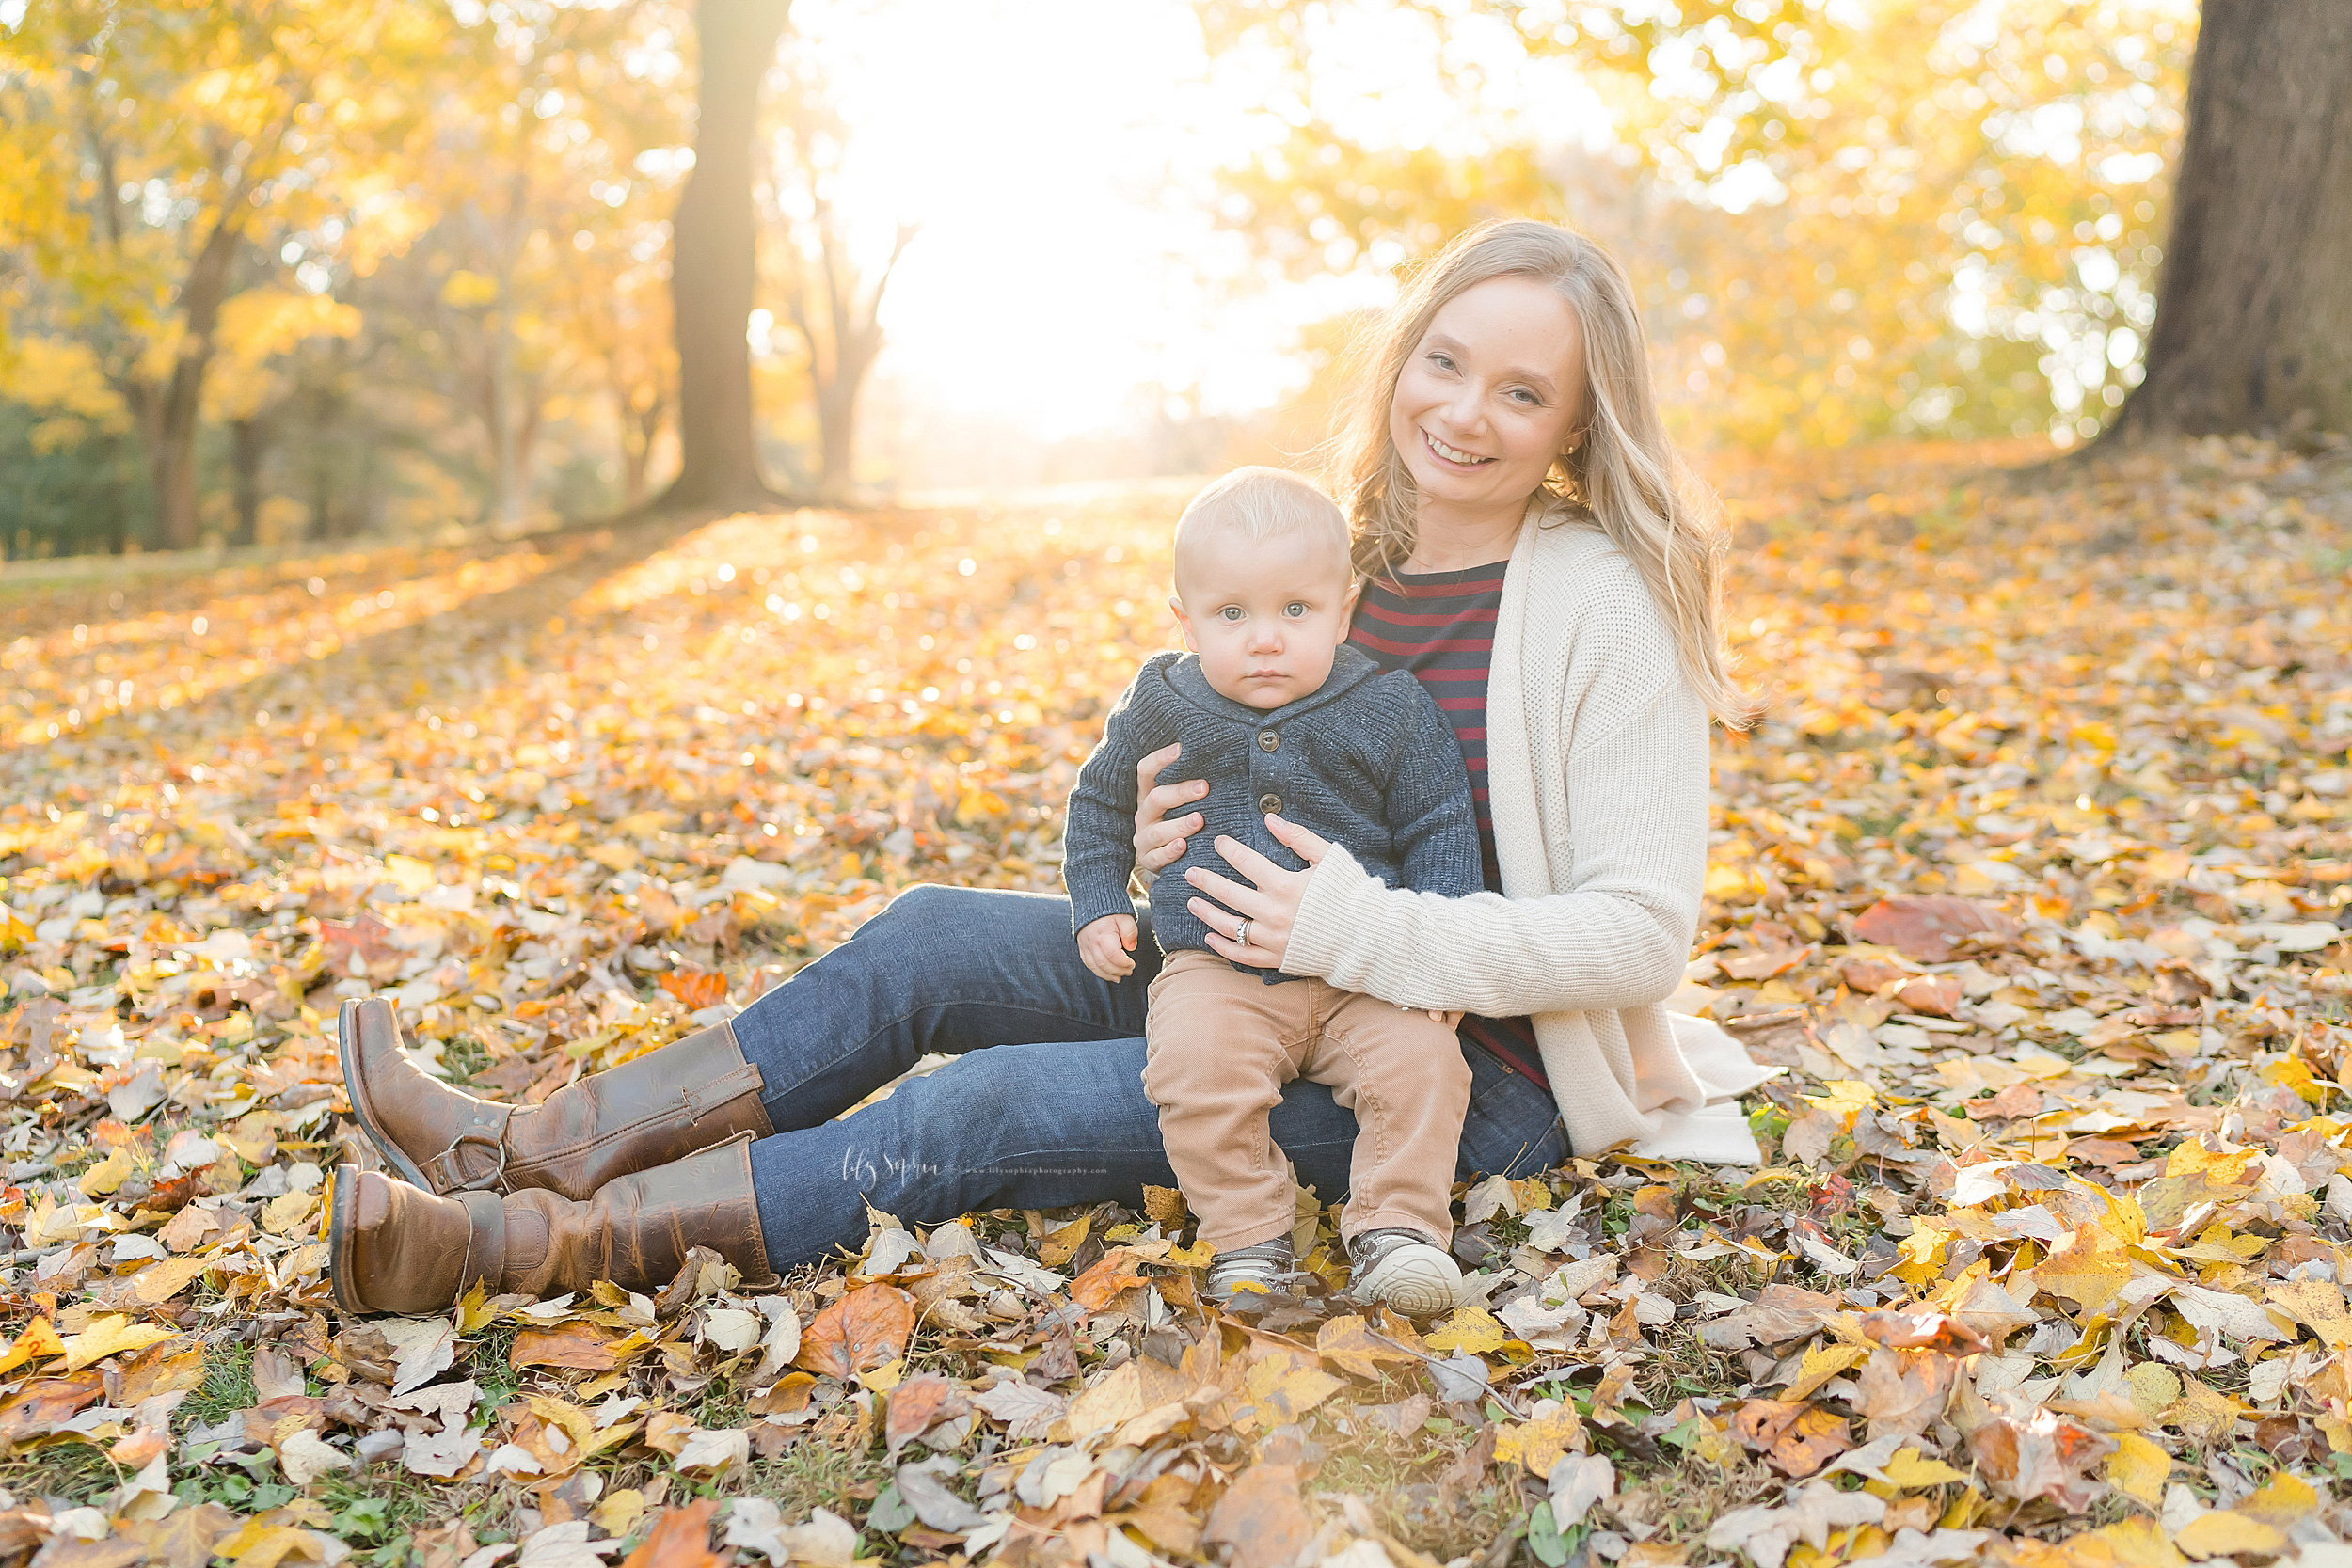 atlanta-midtown-brookhaven-decatur-lily-sophia-photography-photographer-portraits-grant-park-family-sunset-fall-outdoor-session-brothers-toddler-baby_0141.jpg